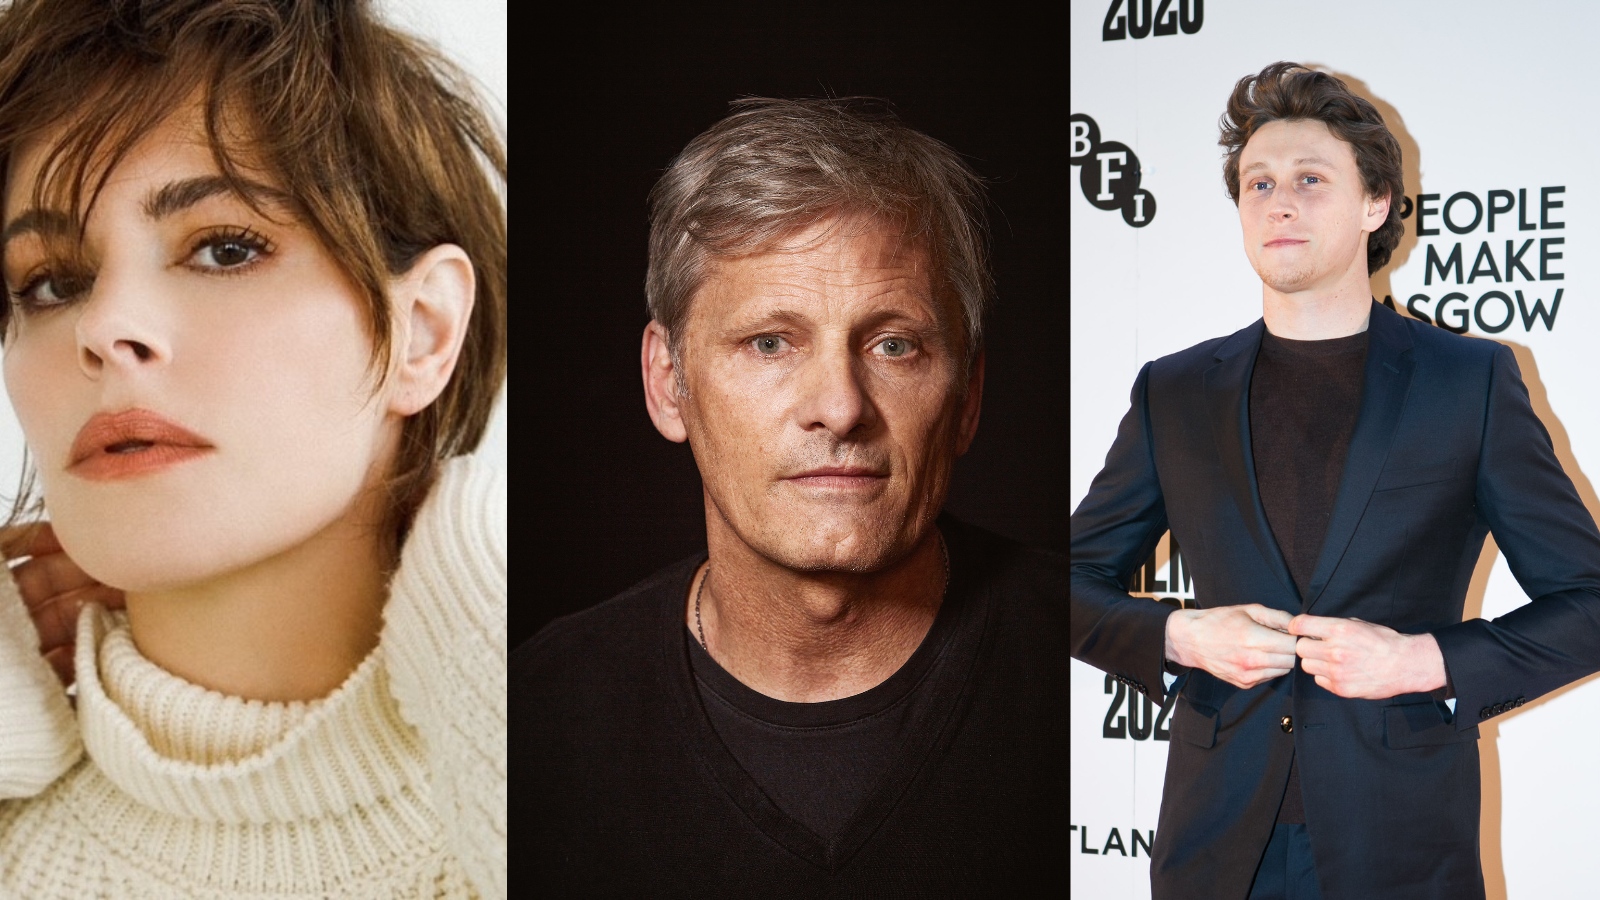 The image is a collage of three images of talent who are appearing at the Glasgow Film Festival, from left to right actress Emily Hampshire, actor Viggo Mortensen and actor George Mackay